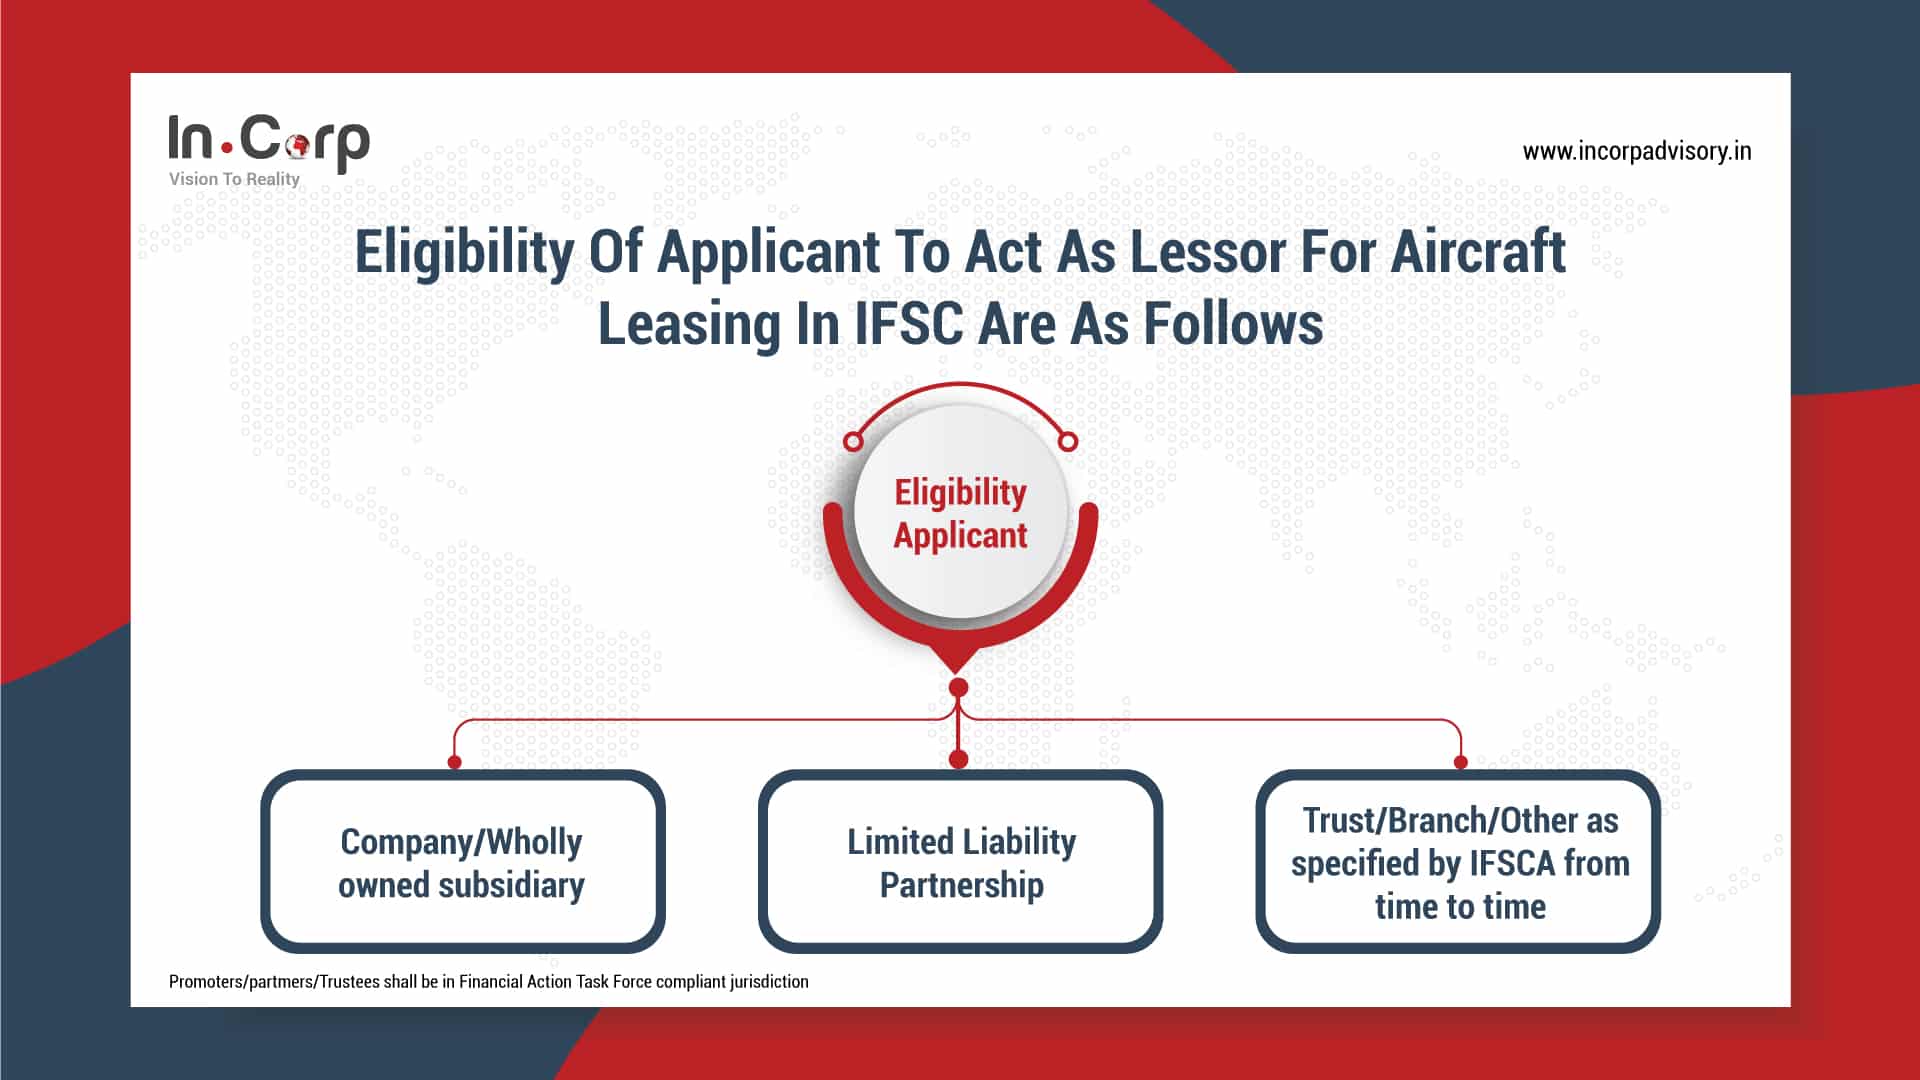 Eligibility of Applicant to act as lessor for Aircraft leasing in IFSC GIFT City